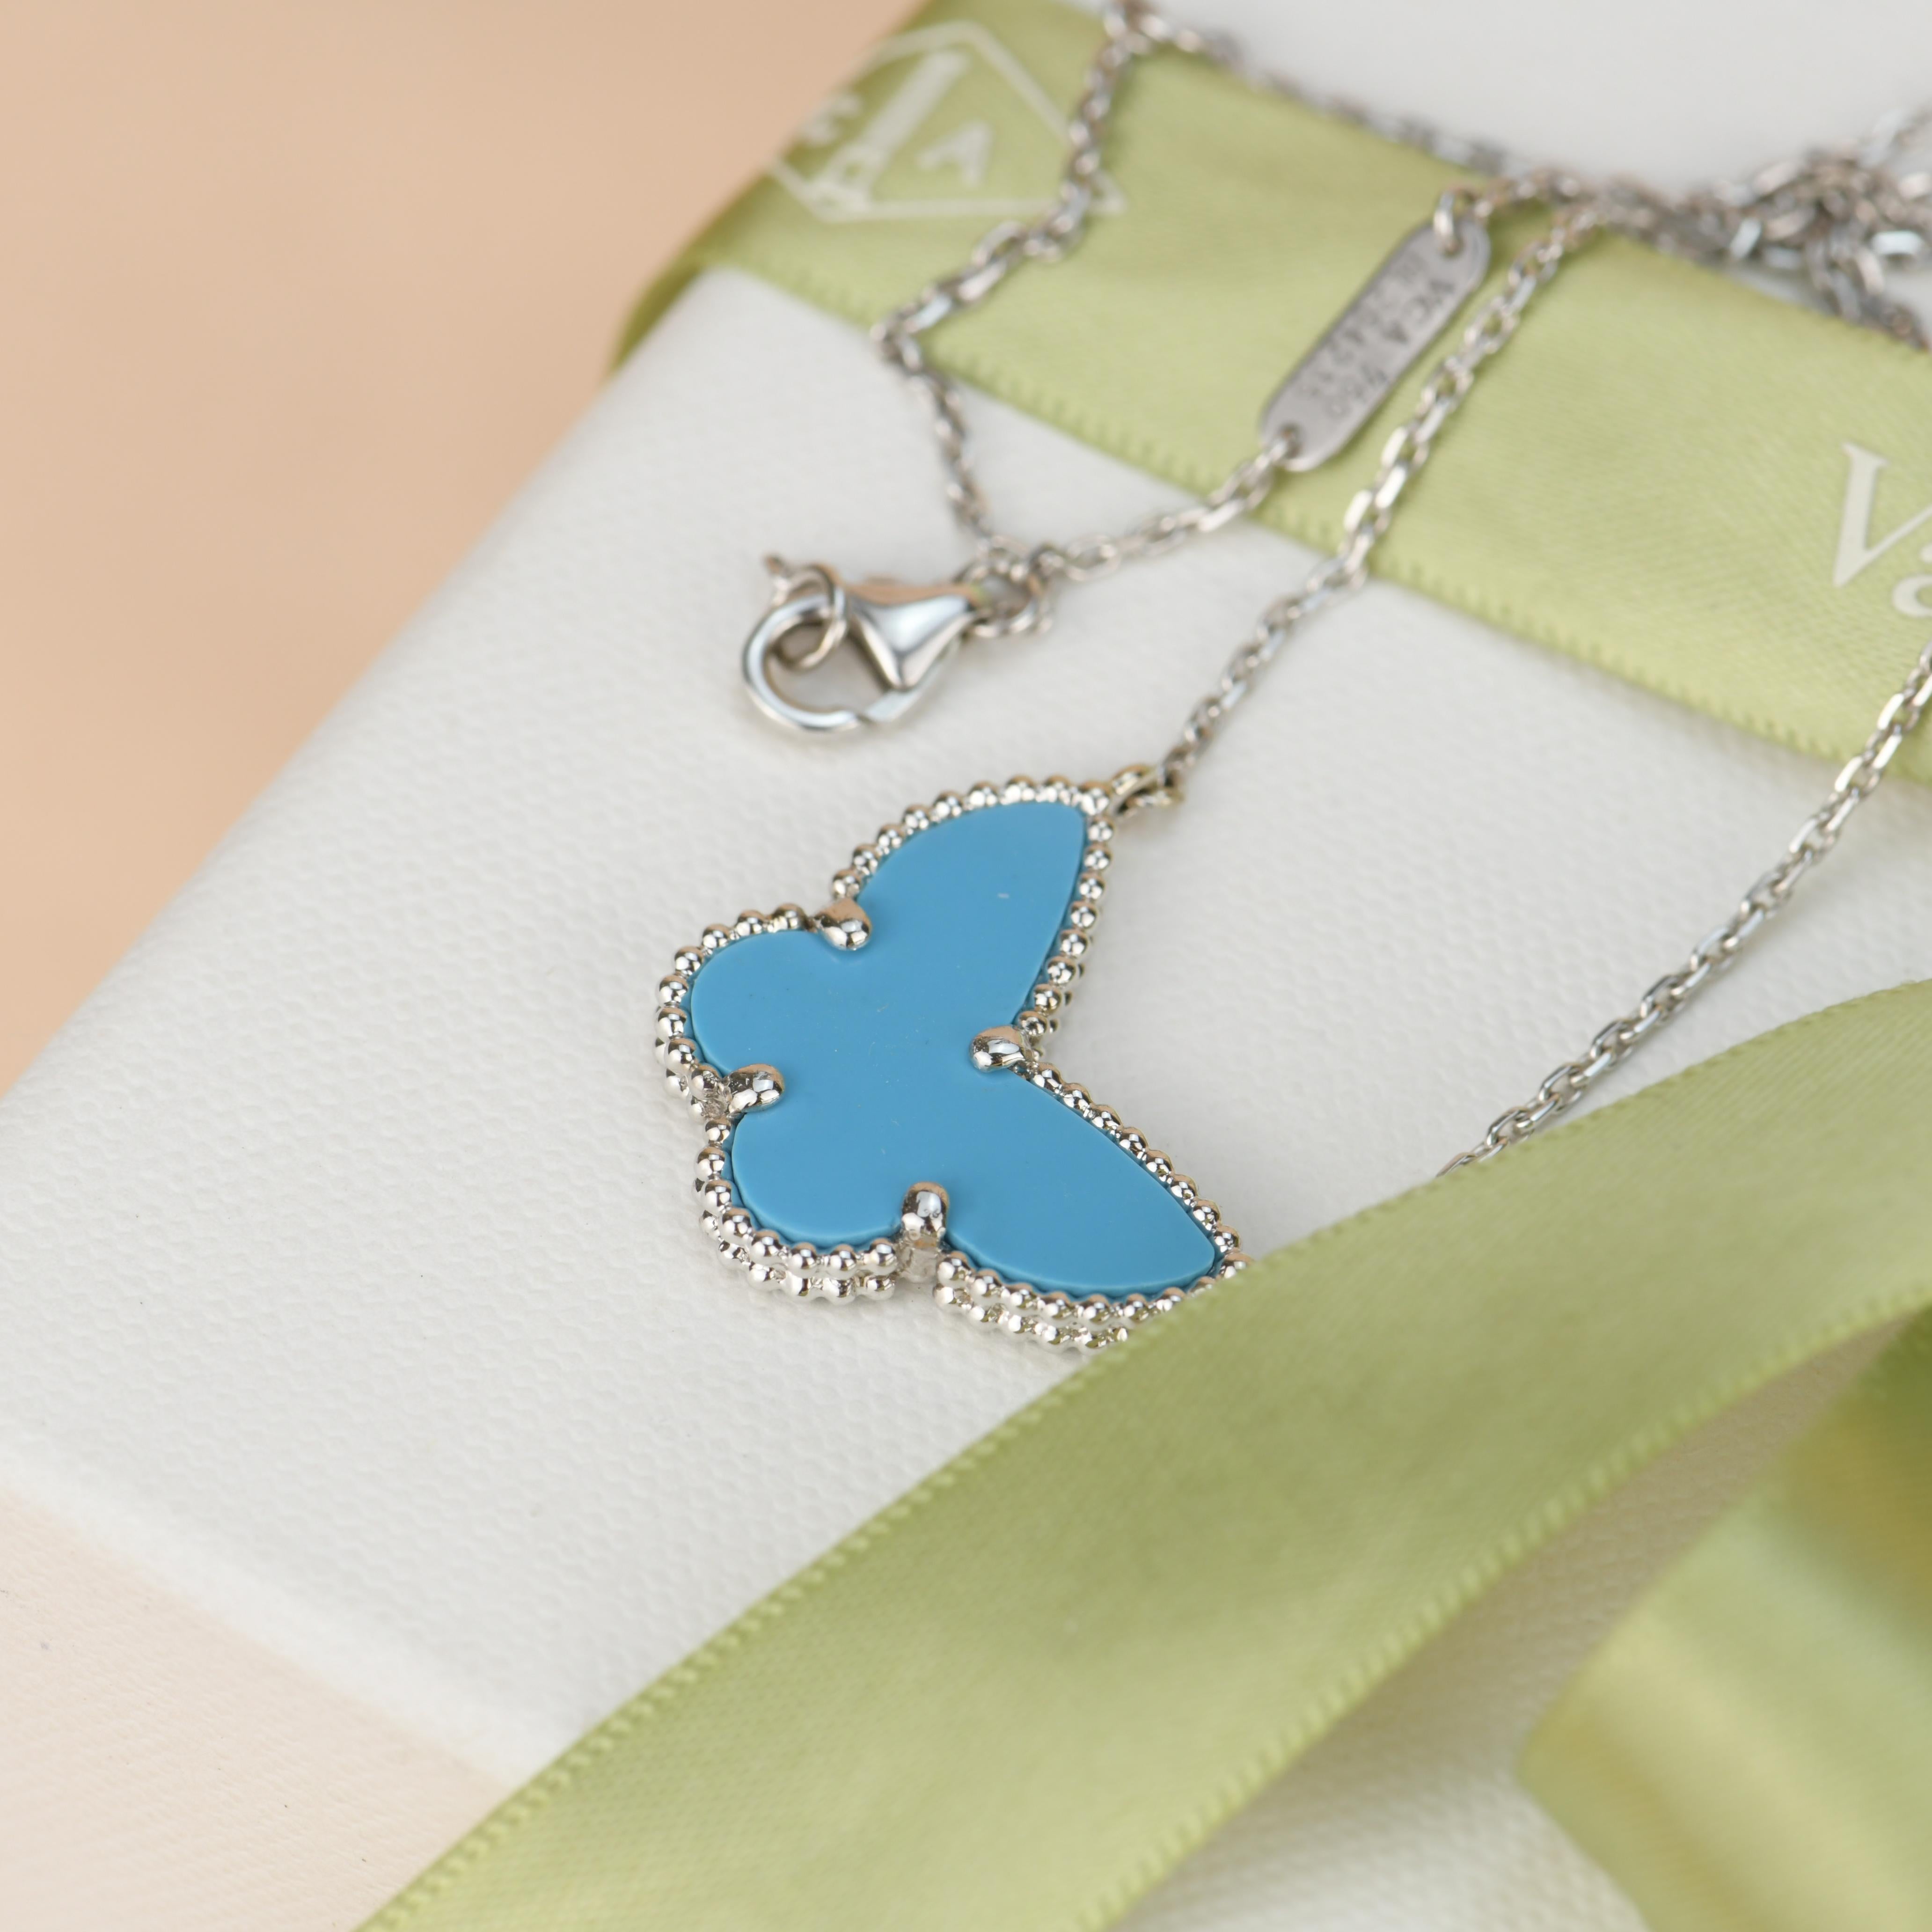 Baguette Cut Van Cleef & Arpels Lucky Alhambra Big Turquoise Butterfly Pendant Necklace